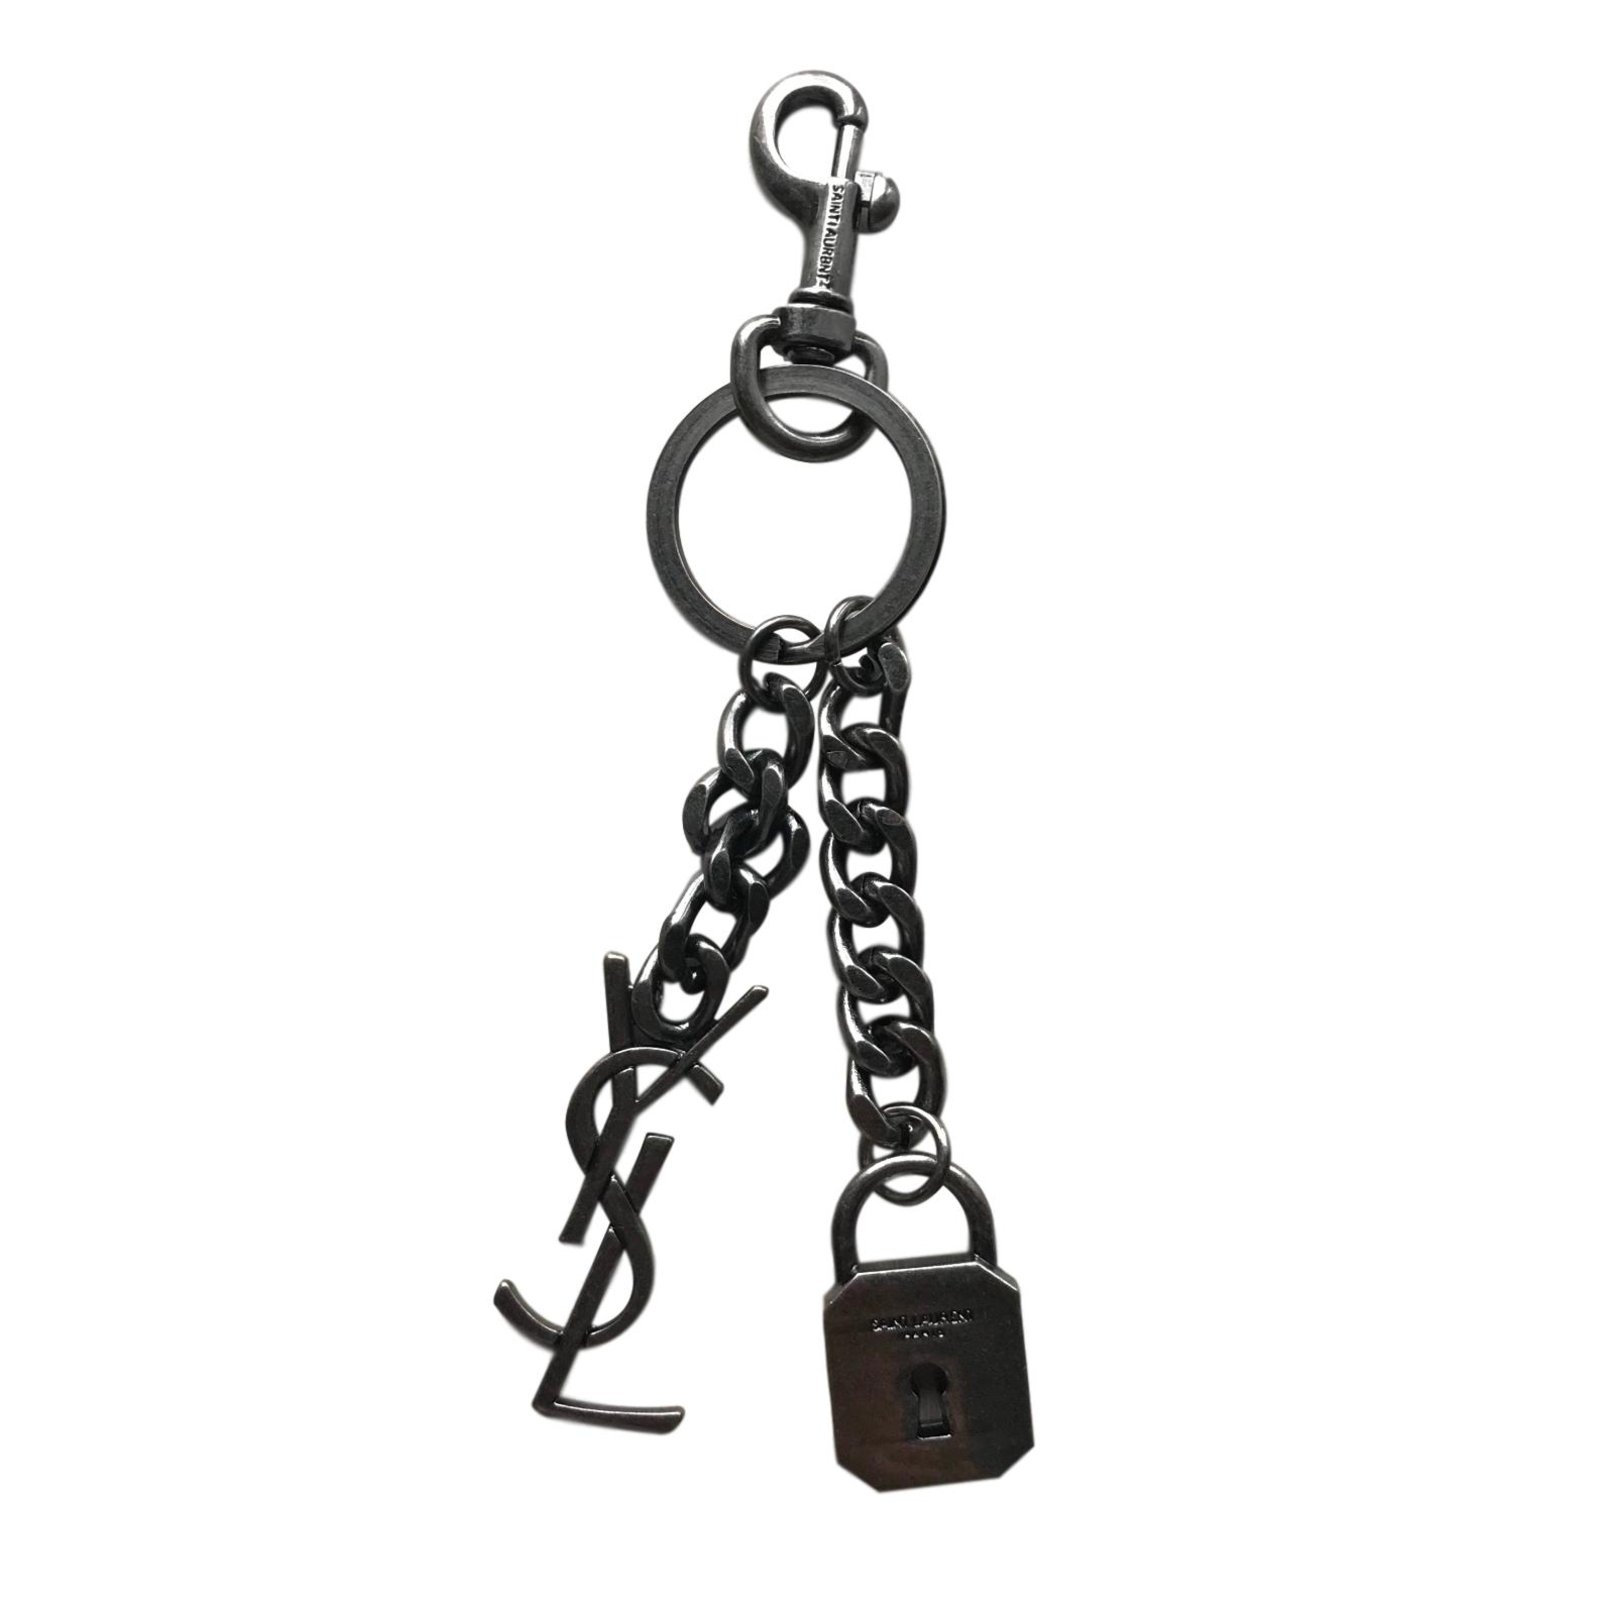 Women's Keyrings and Charms, Saint Laurent